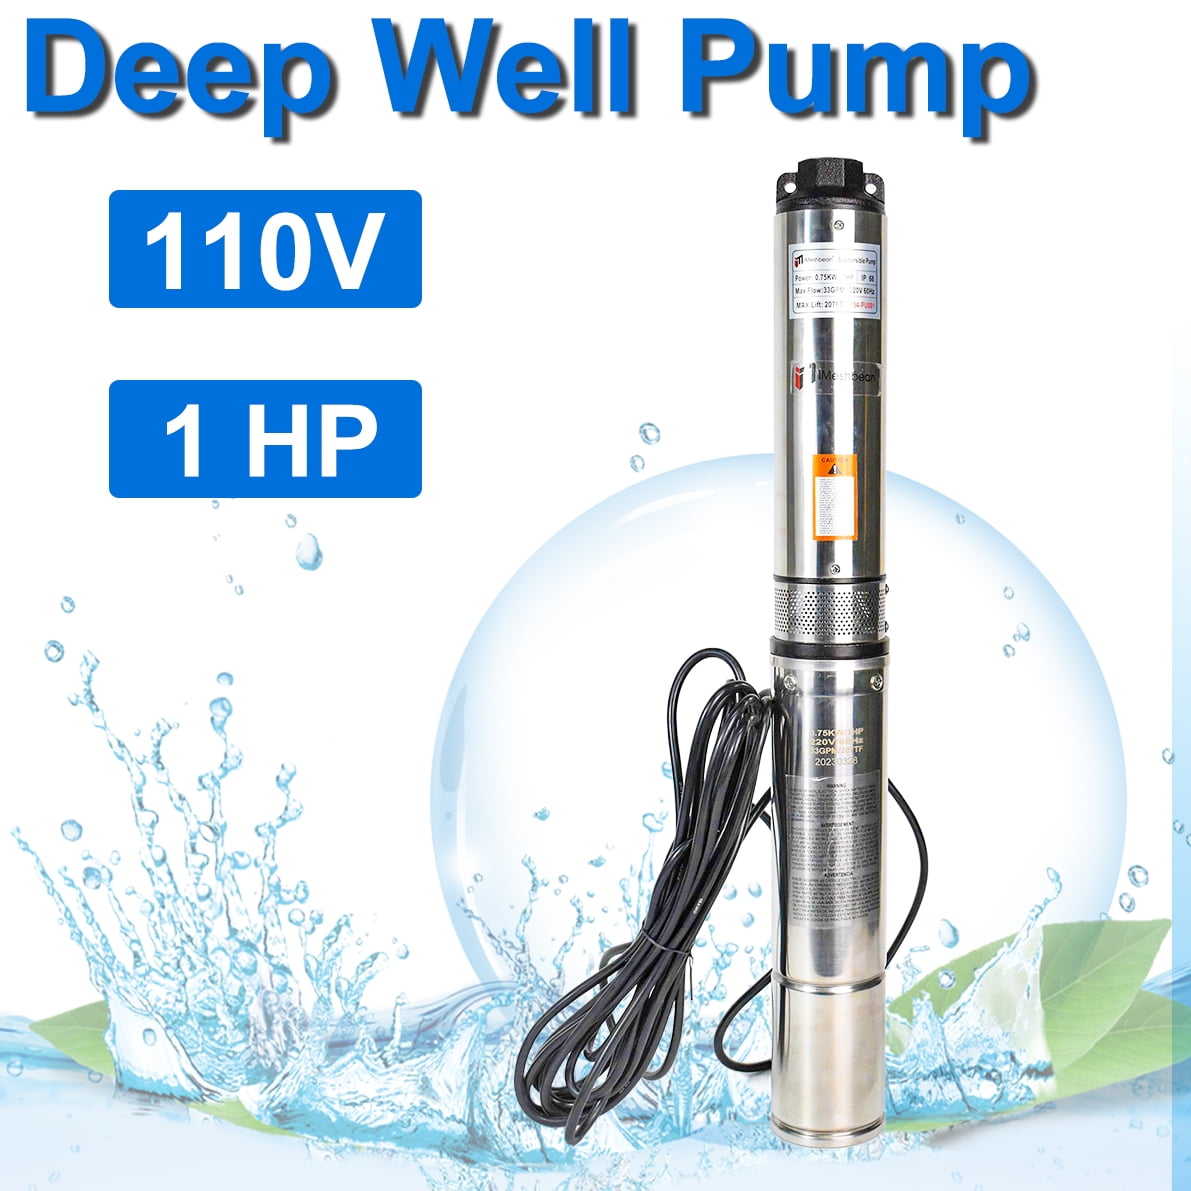 iMeshbean Deep Submersible Well Pump 1HP 110V,207ft Head 33GPM with 100ft  Cord,Stainless Steel Submersible Well Pump 4